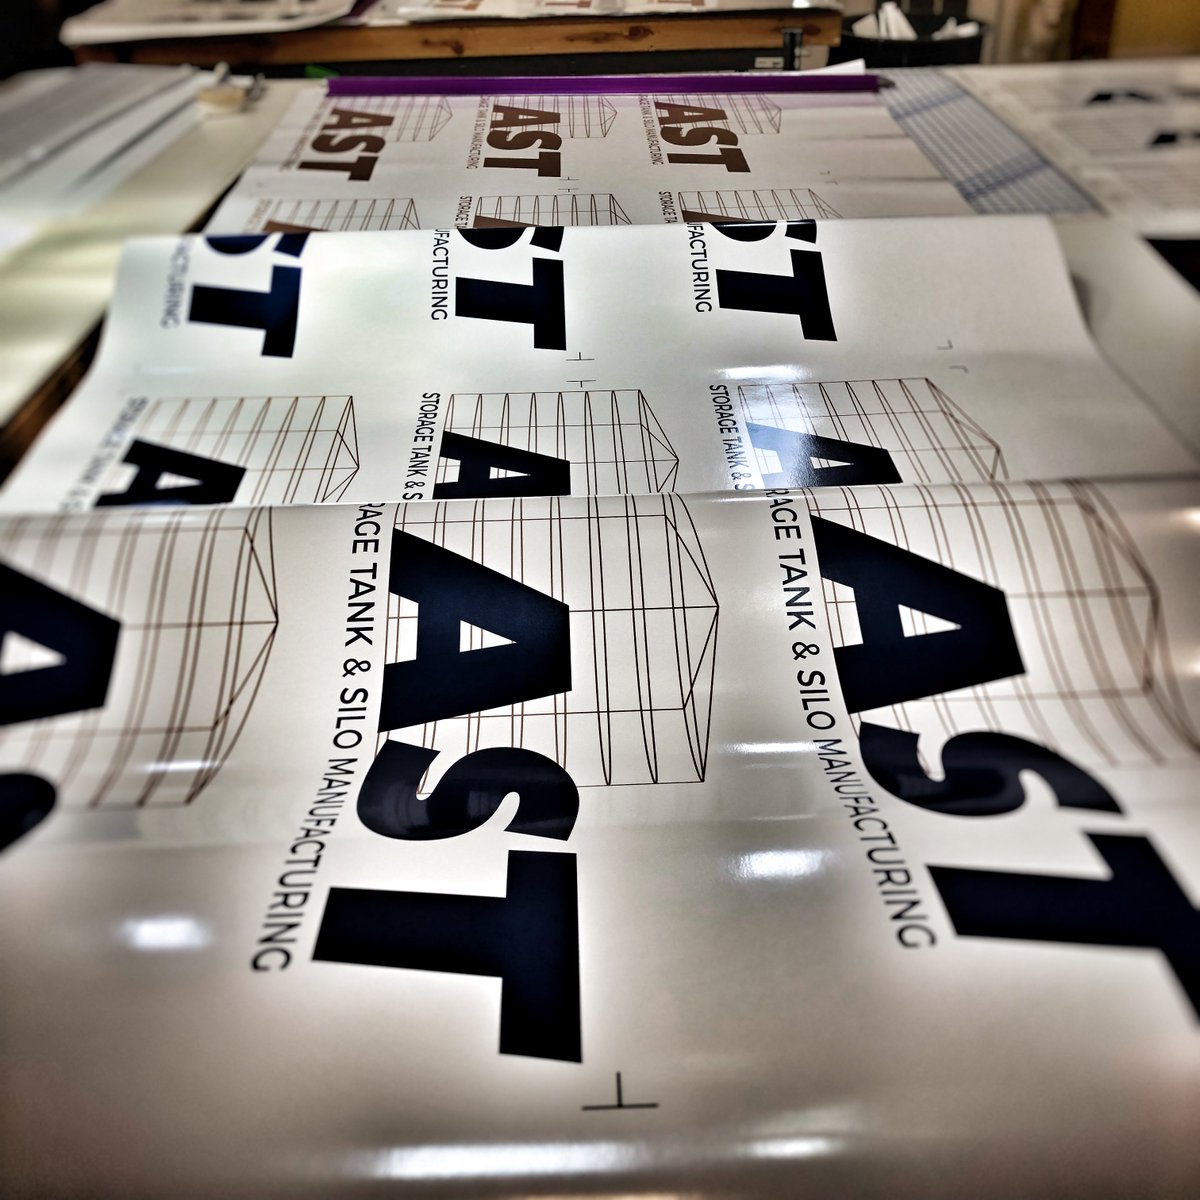 Need BIG #decals? Yep, we do those too. Helping our friends out at #PositiveImpact with what seems like a neverending see of #SiloTankStickers. Any color, any size, any qty. How can we help you reinforce your #brand? #branding #stickers #labels #bigorsmall #outdoorsafe